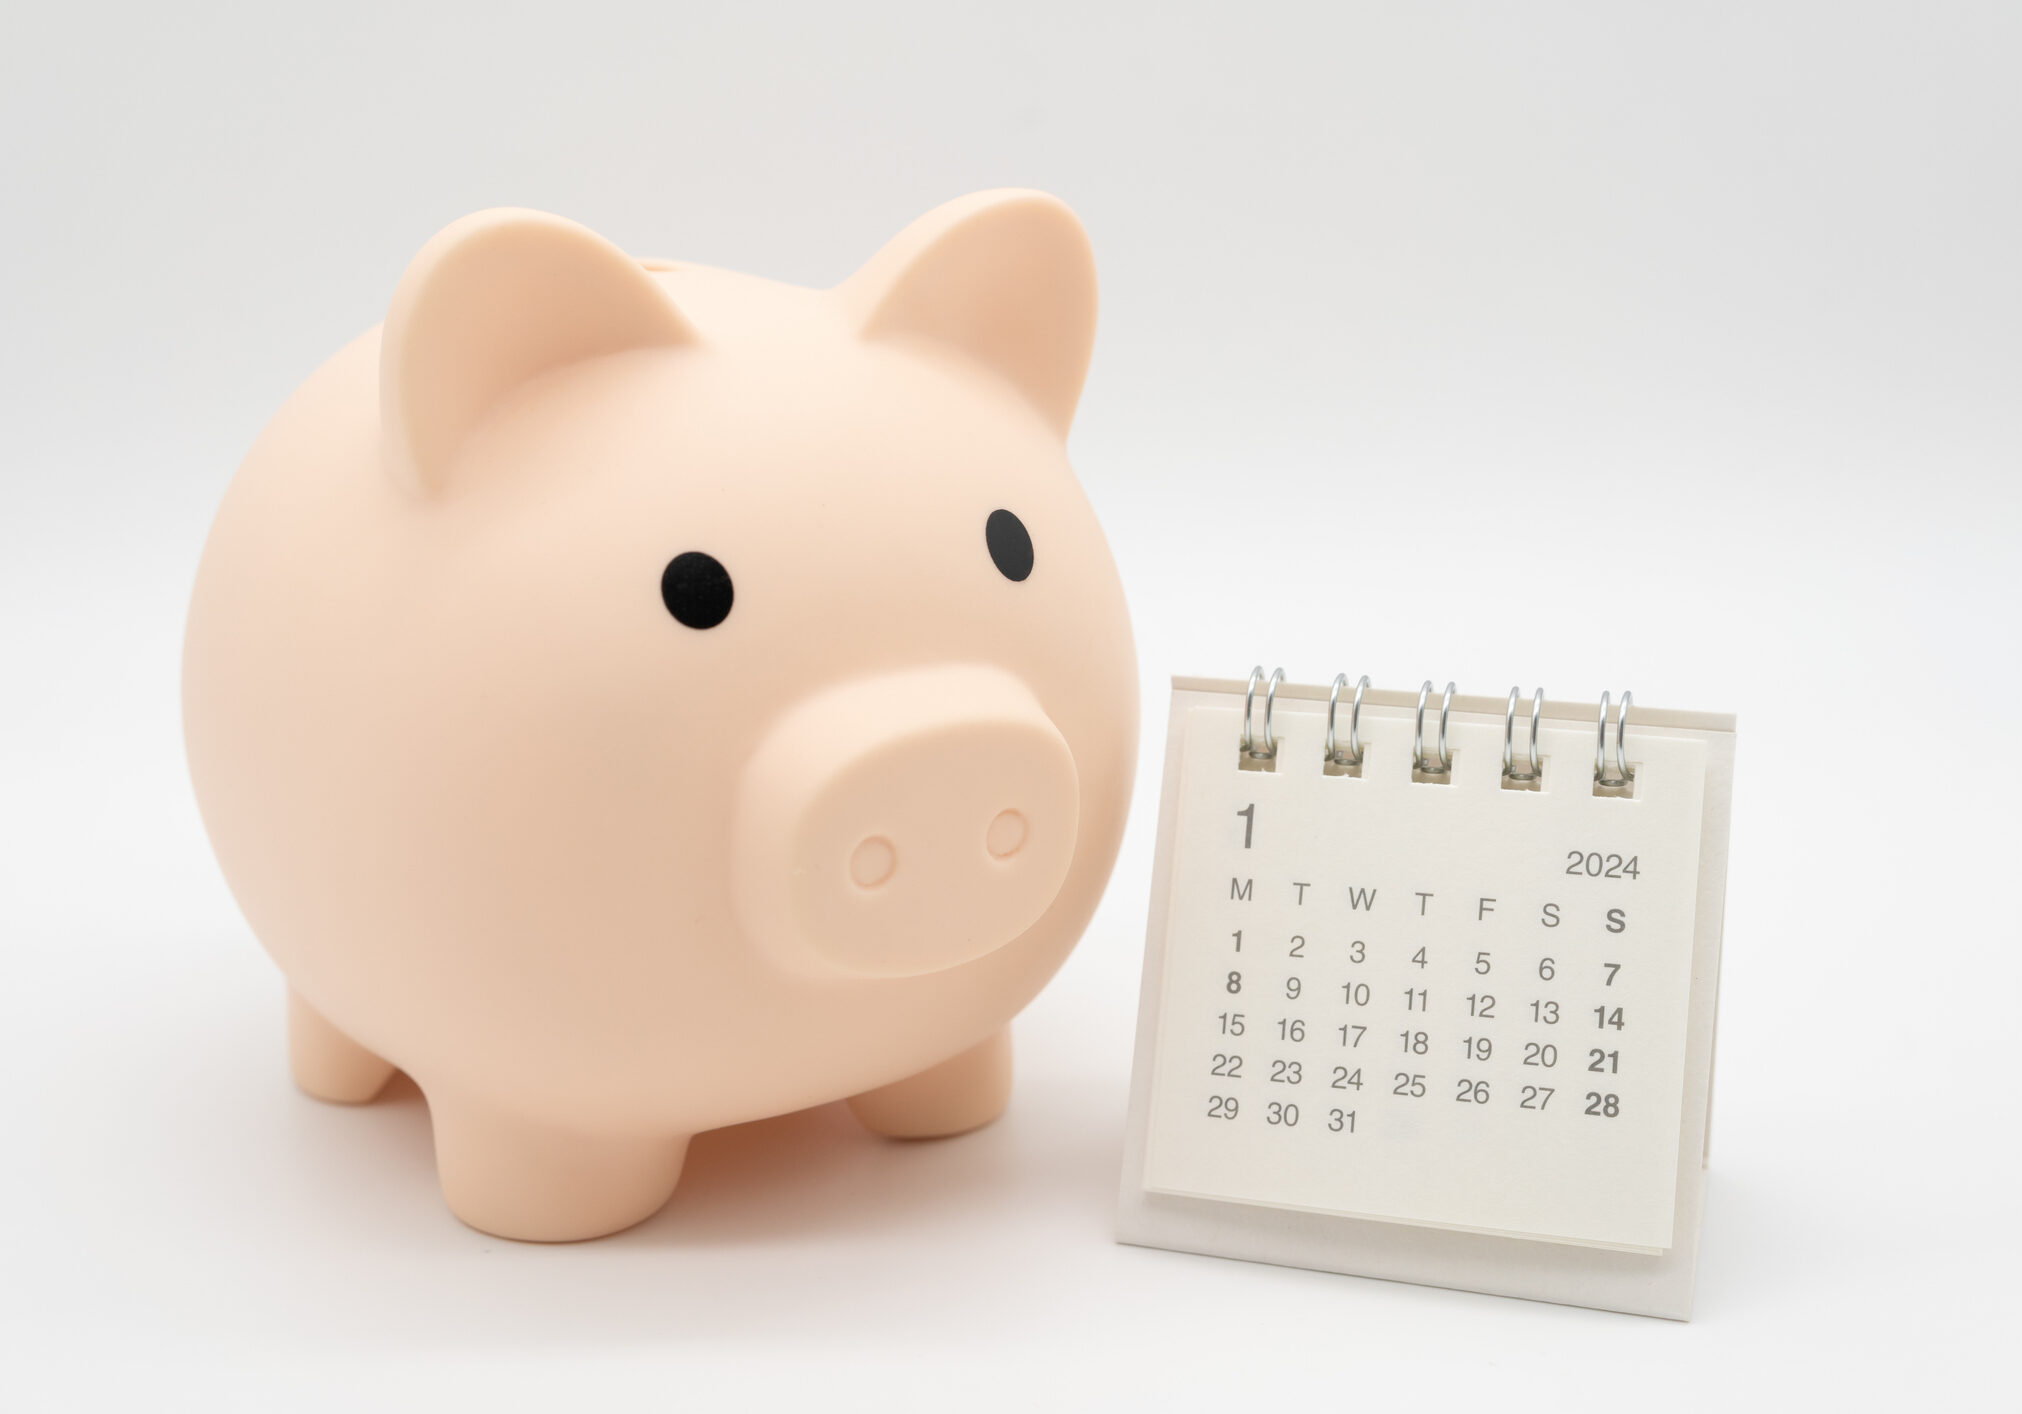 Piggy Bank and Desk calendar isolated on white background. For retirement, Pension Plan concept. Time for a new start.